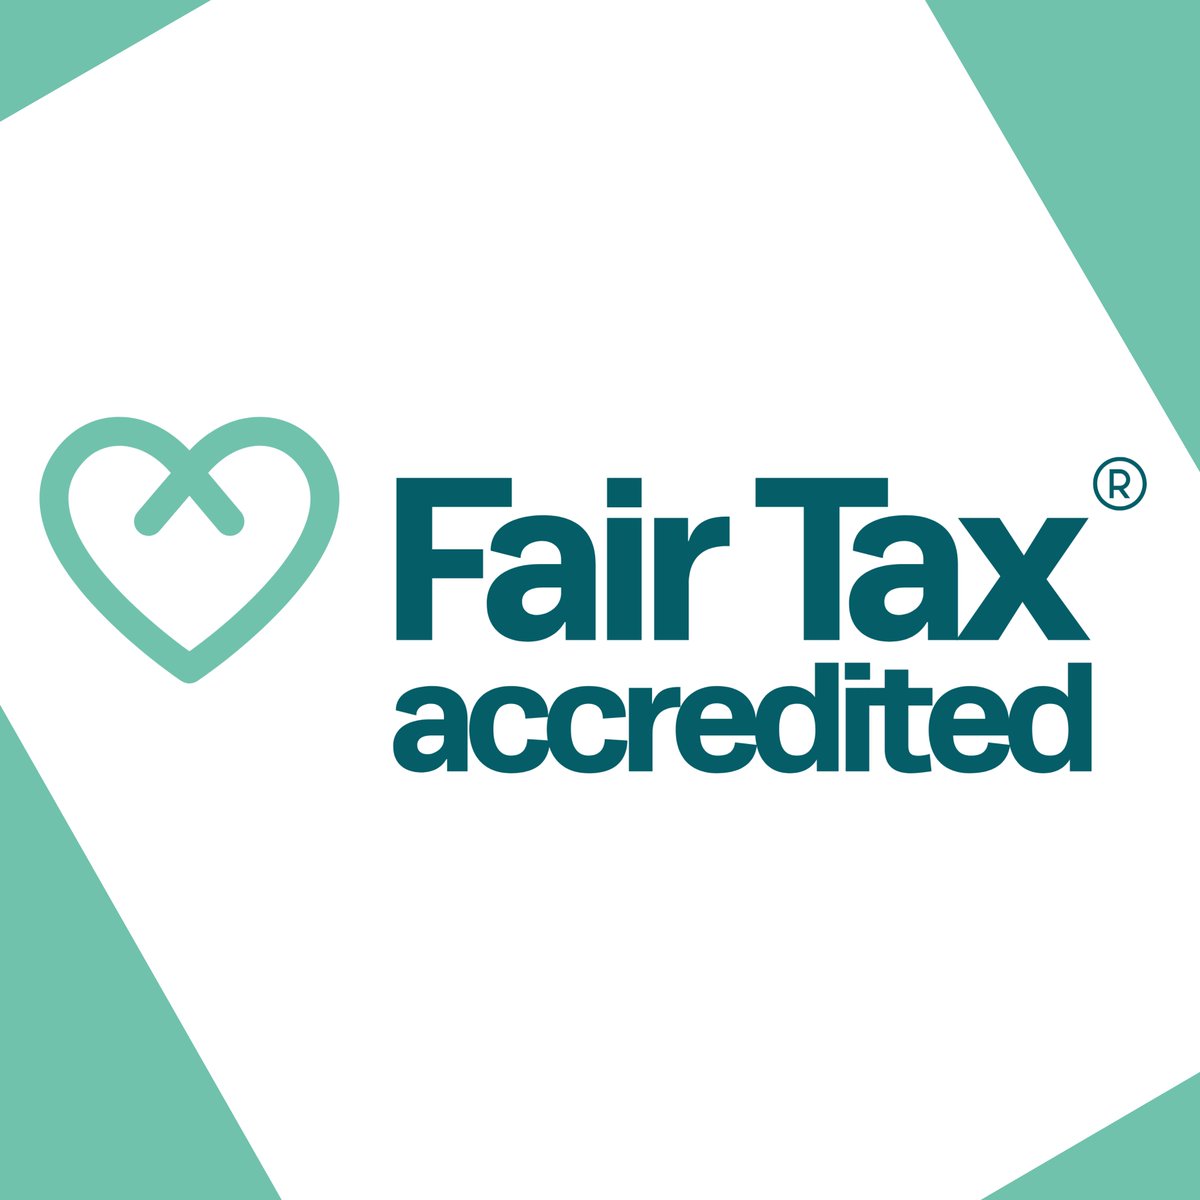 We are thrilled to have been reaccredited with the Fair Tax Foundation mark for another year. Richer Sounds are proud to pay the right amount of corporation tax and want to encourage other organisations to do the same. Learn more: fairtaxmark.net